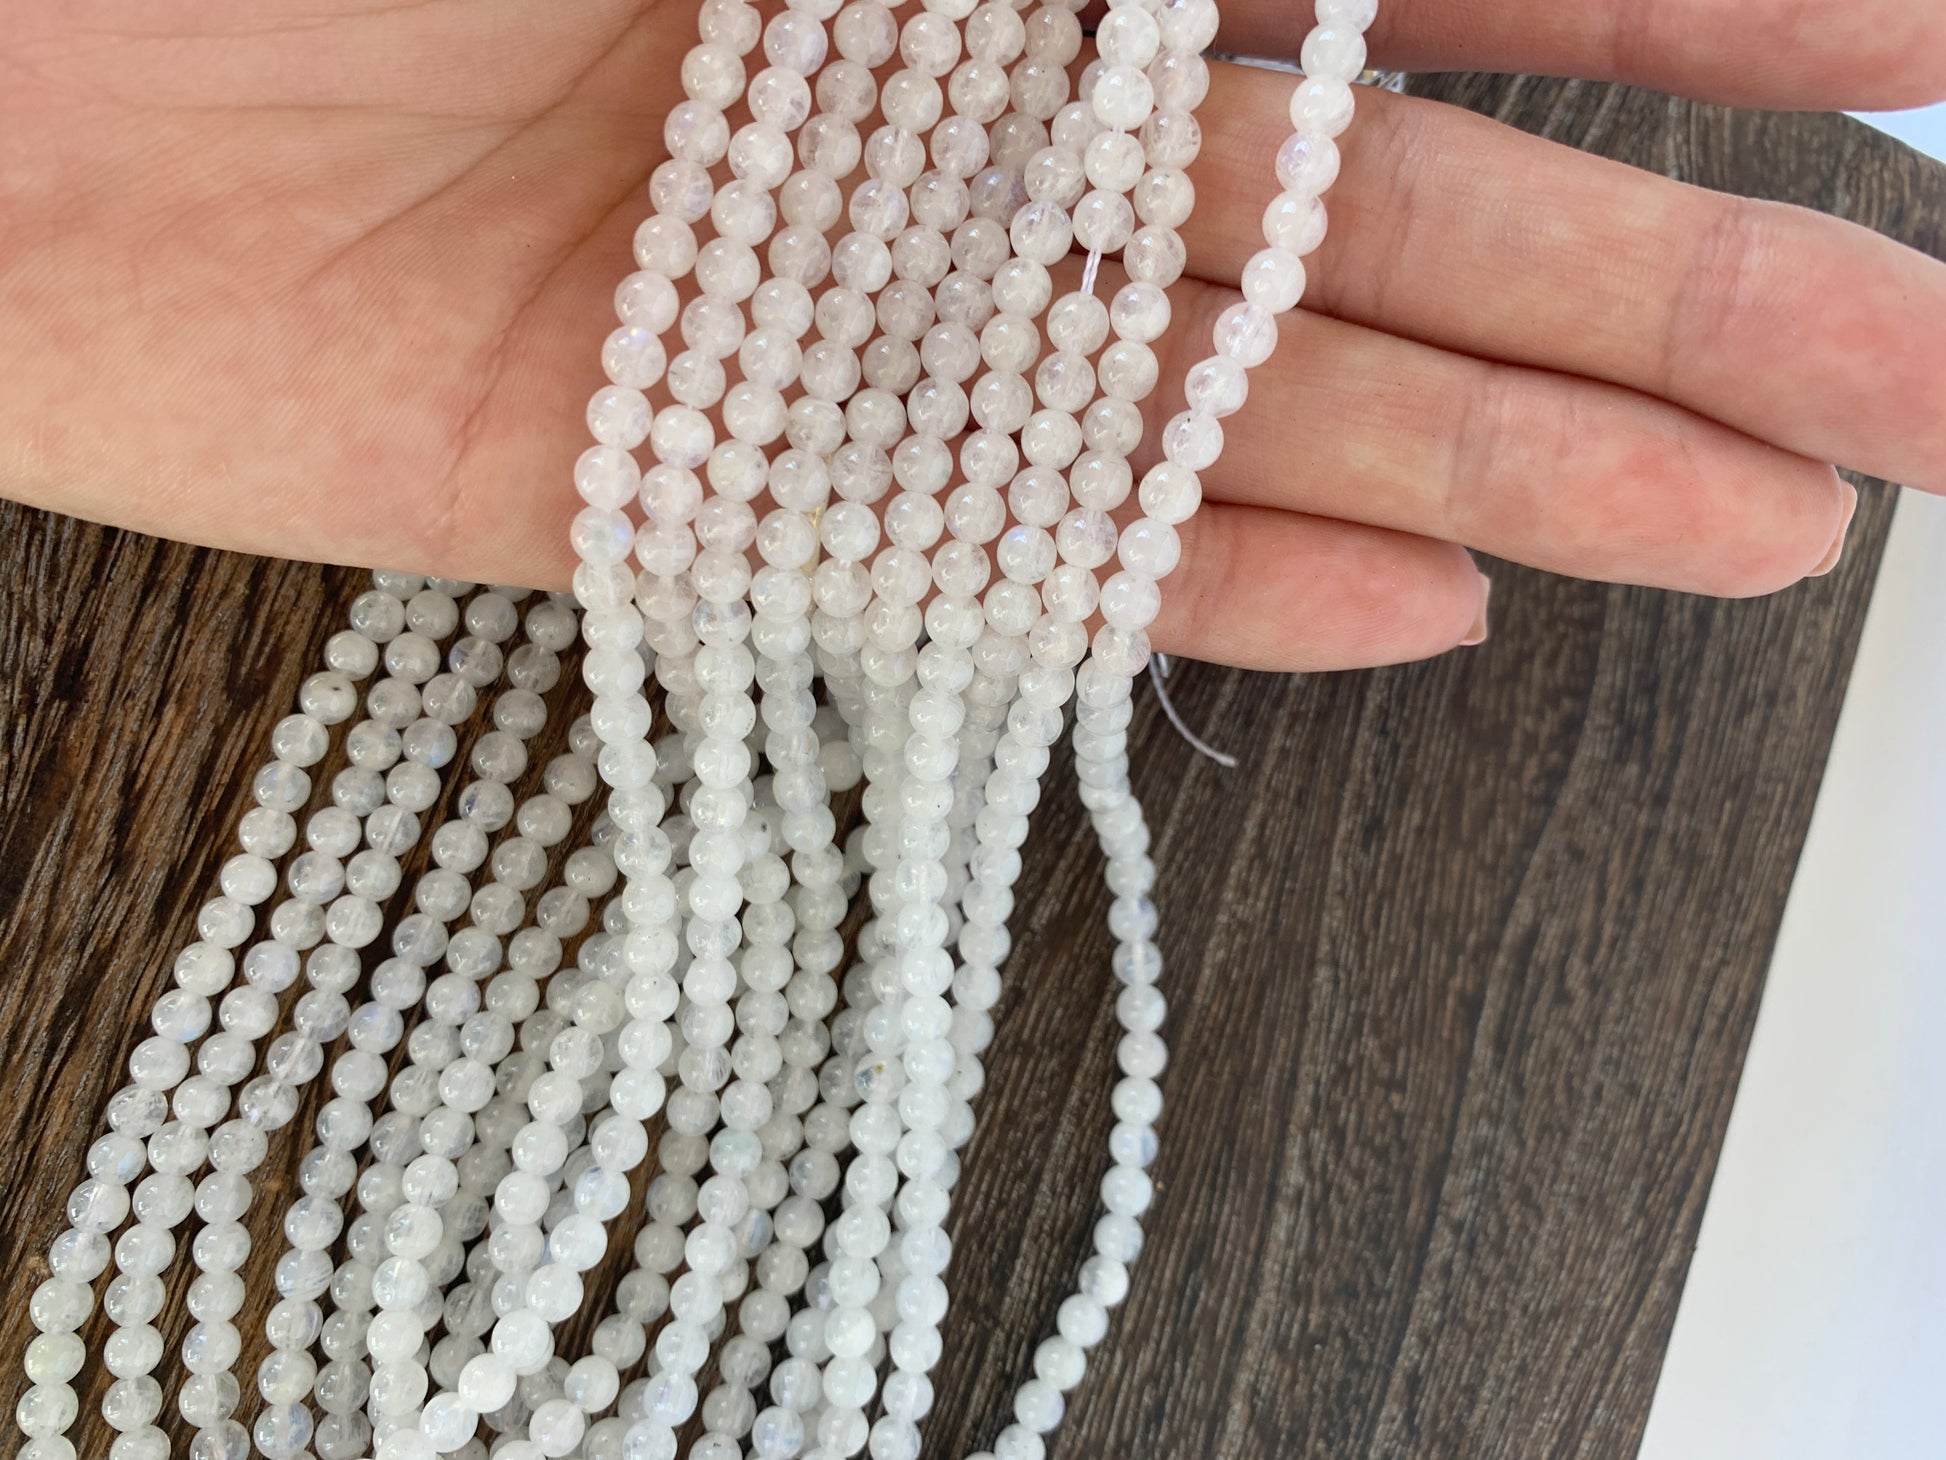 Crafting supplies such as rainbow moonstone beads available at wholesale and retail prices, only at our crystal shop in San Diego!